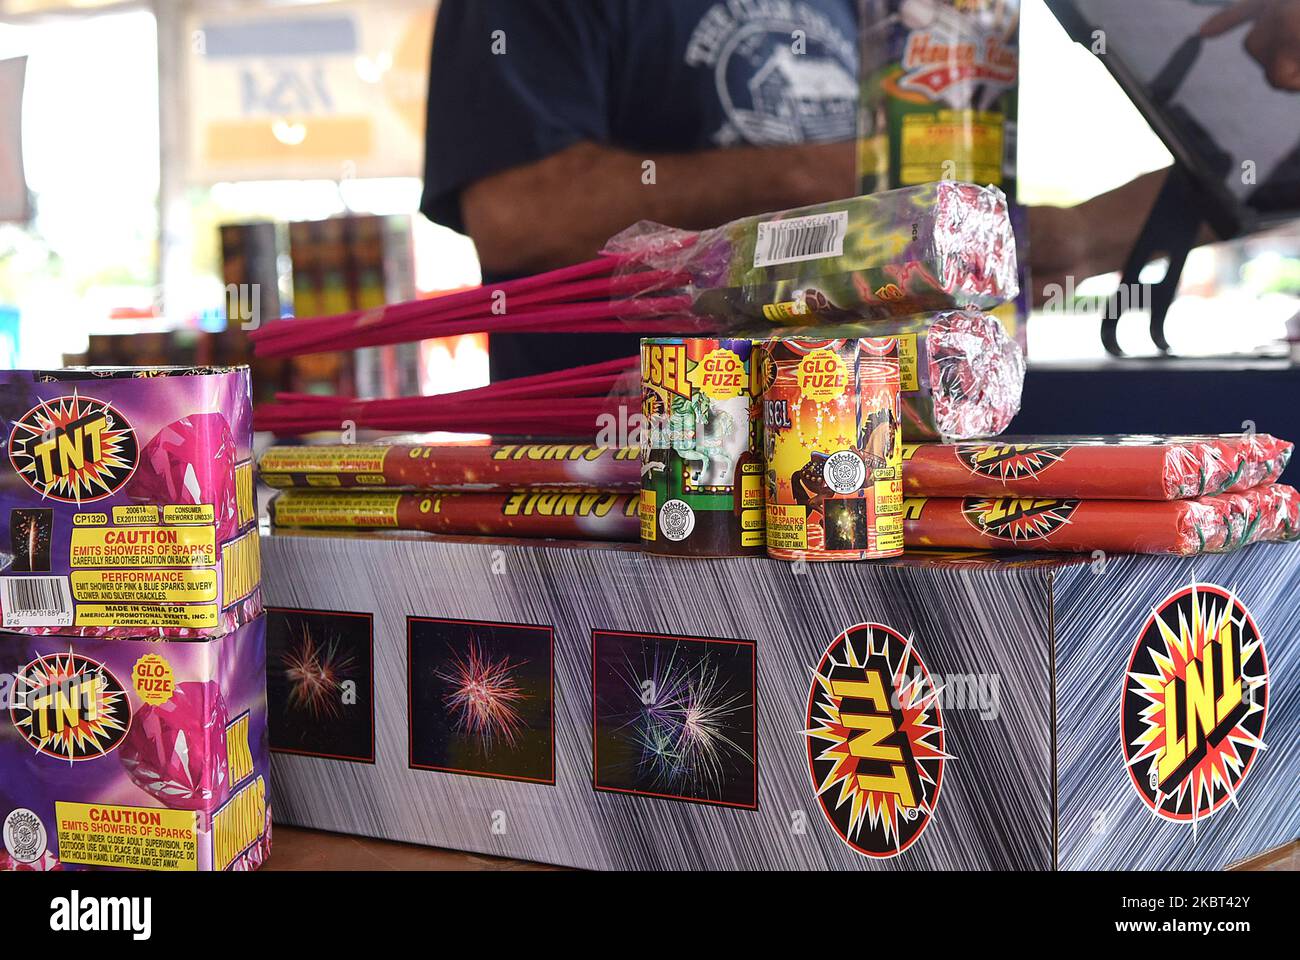 A customer purchases fireworks from a vendor in a temporary tent to celebrate Independence Day on July 4, 2020 in Orlando, Florida. Sales of personal fireworks have increased this year due to the cancellation of as many as 80 percent of the Fourth of July fireworks displays in large cities due to the coronavirus pandemic. (Photo by Paul Hennessy/NurPhoto) Stock Photo